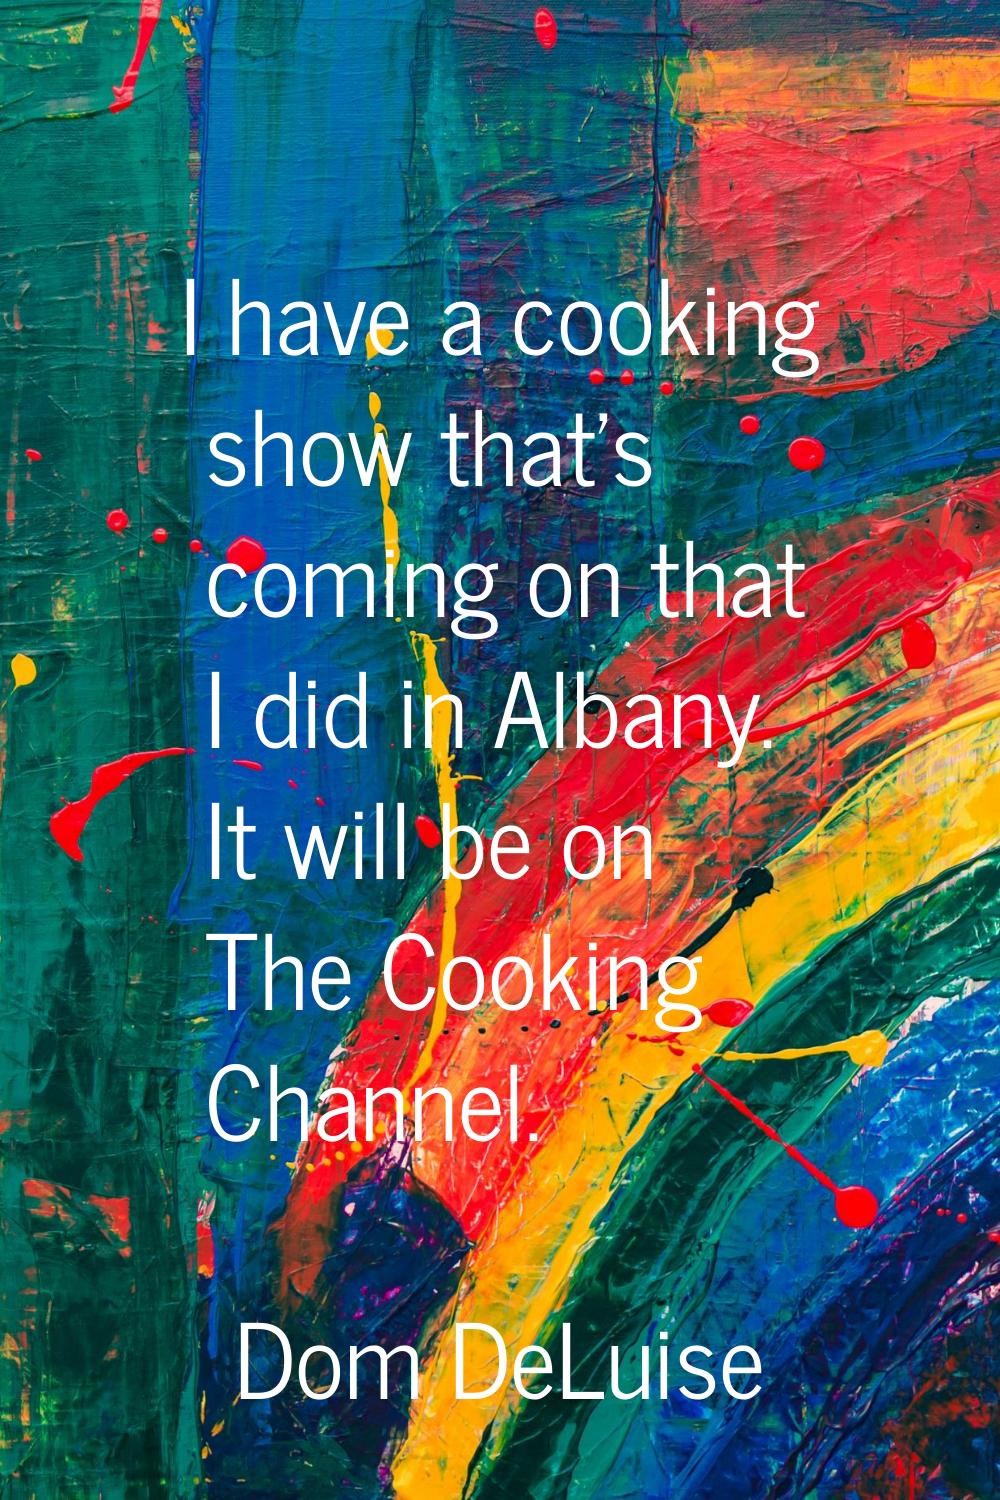 I have a cooking show that's coming on that I did in Albany. It will be on The Cooking Channel.